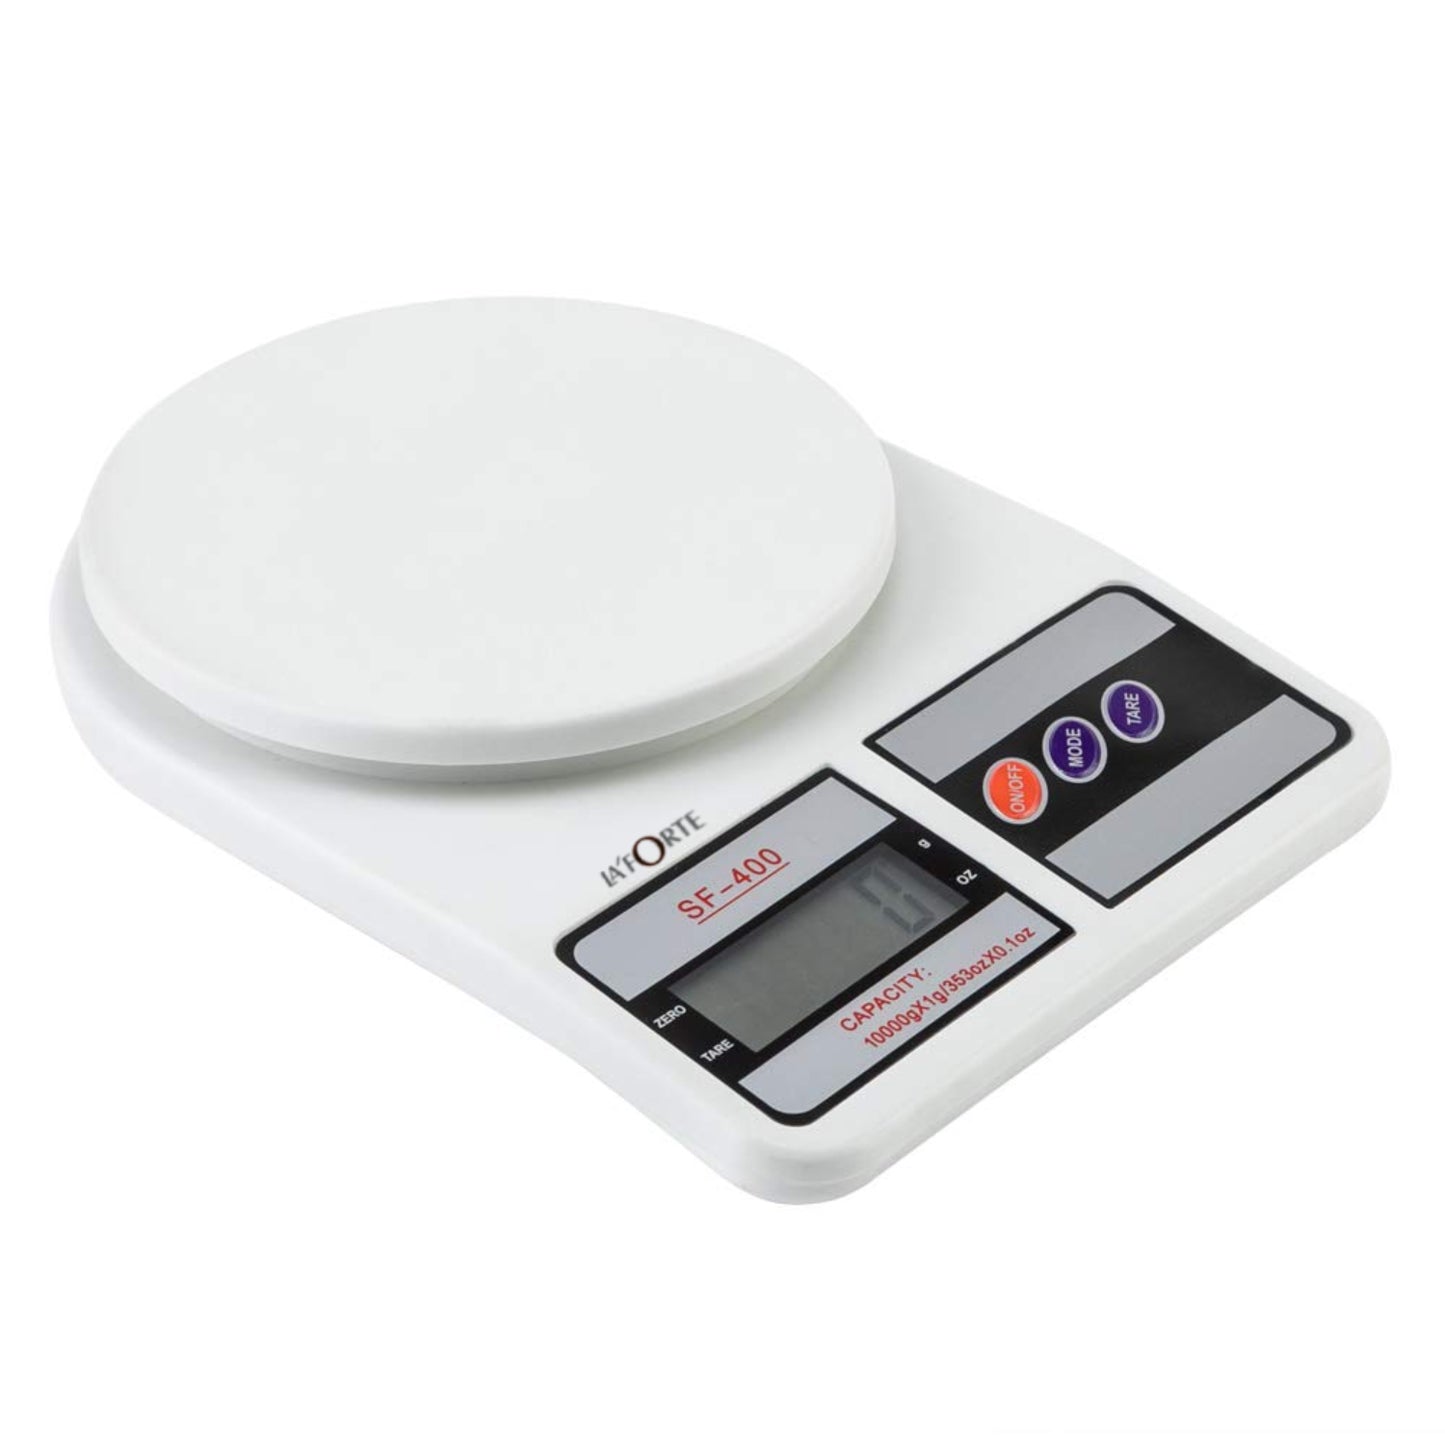 LA' FORTE Multipurpose Portable Electronic Digital Weighing Scale (10 KG)